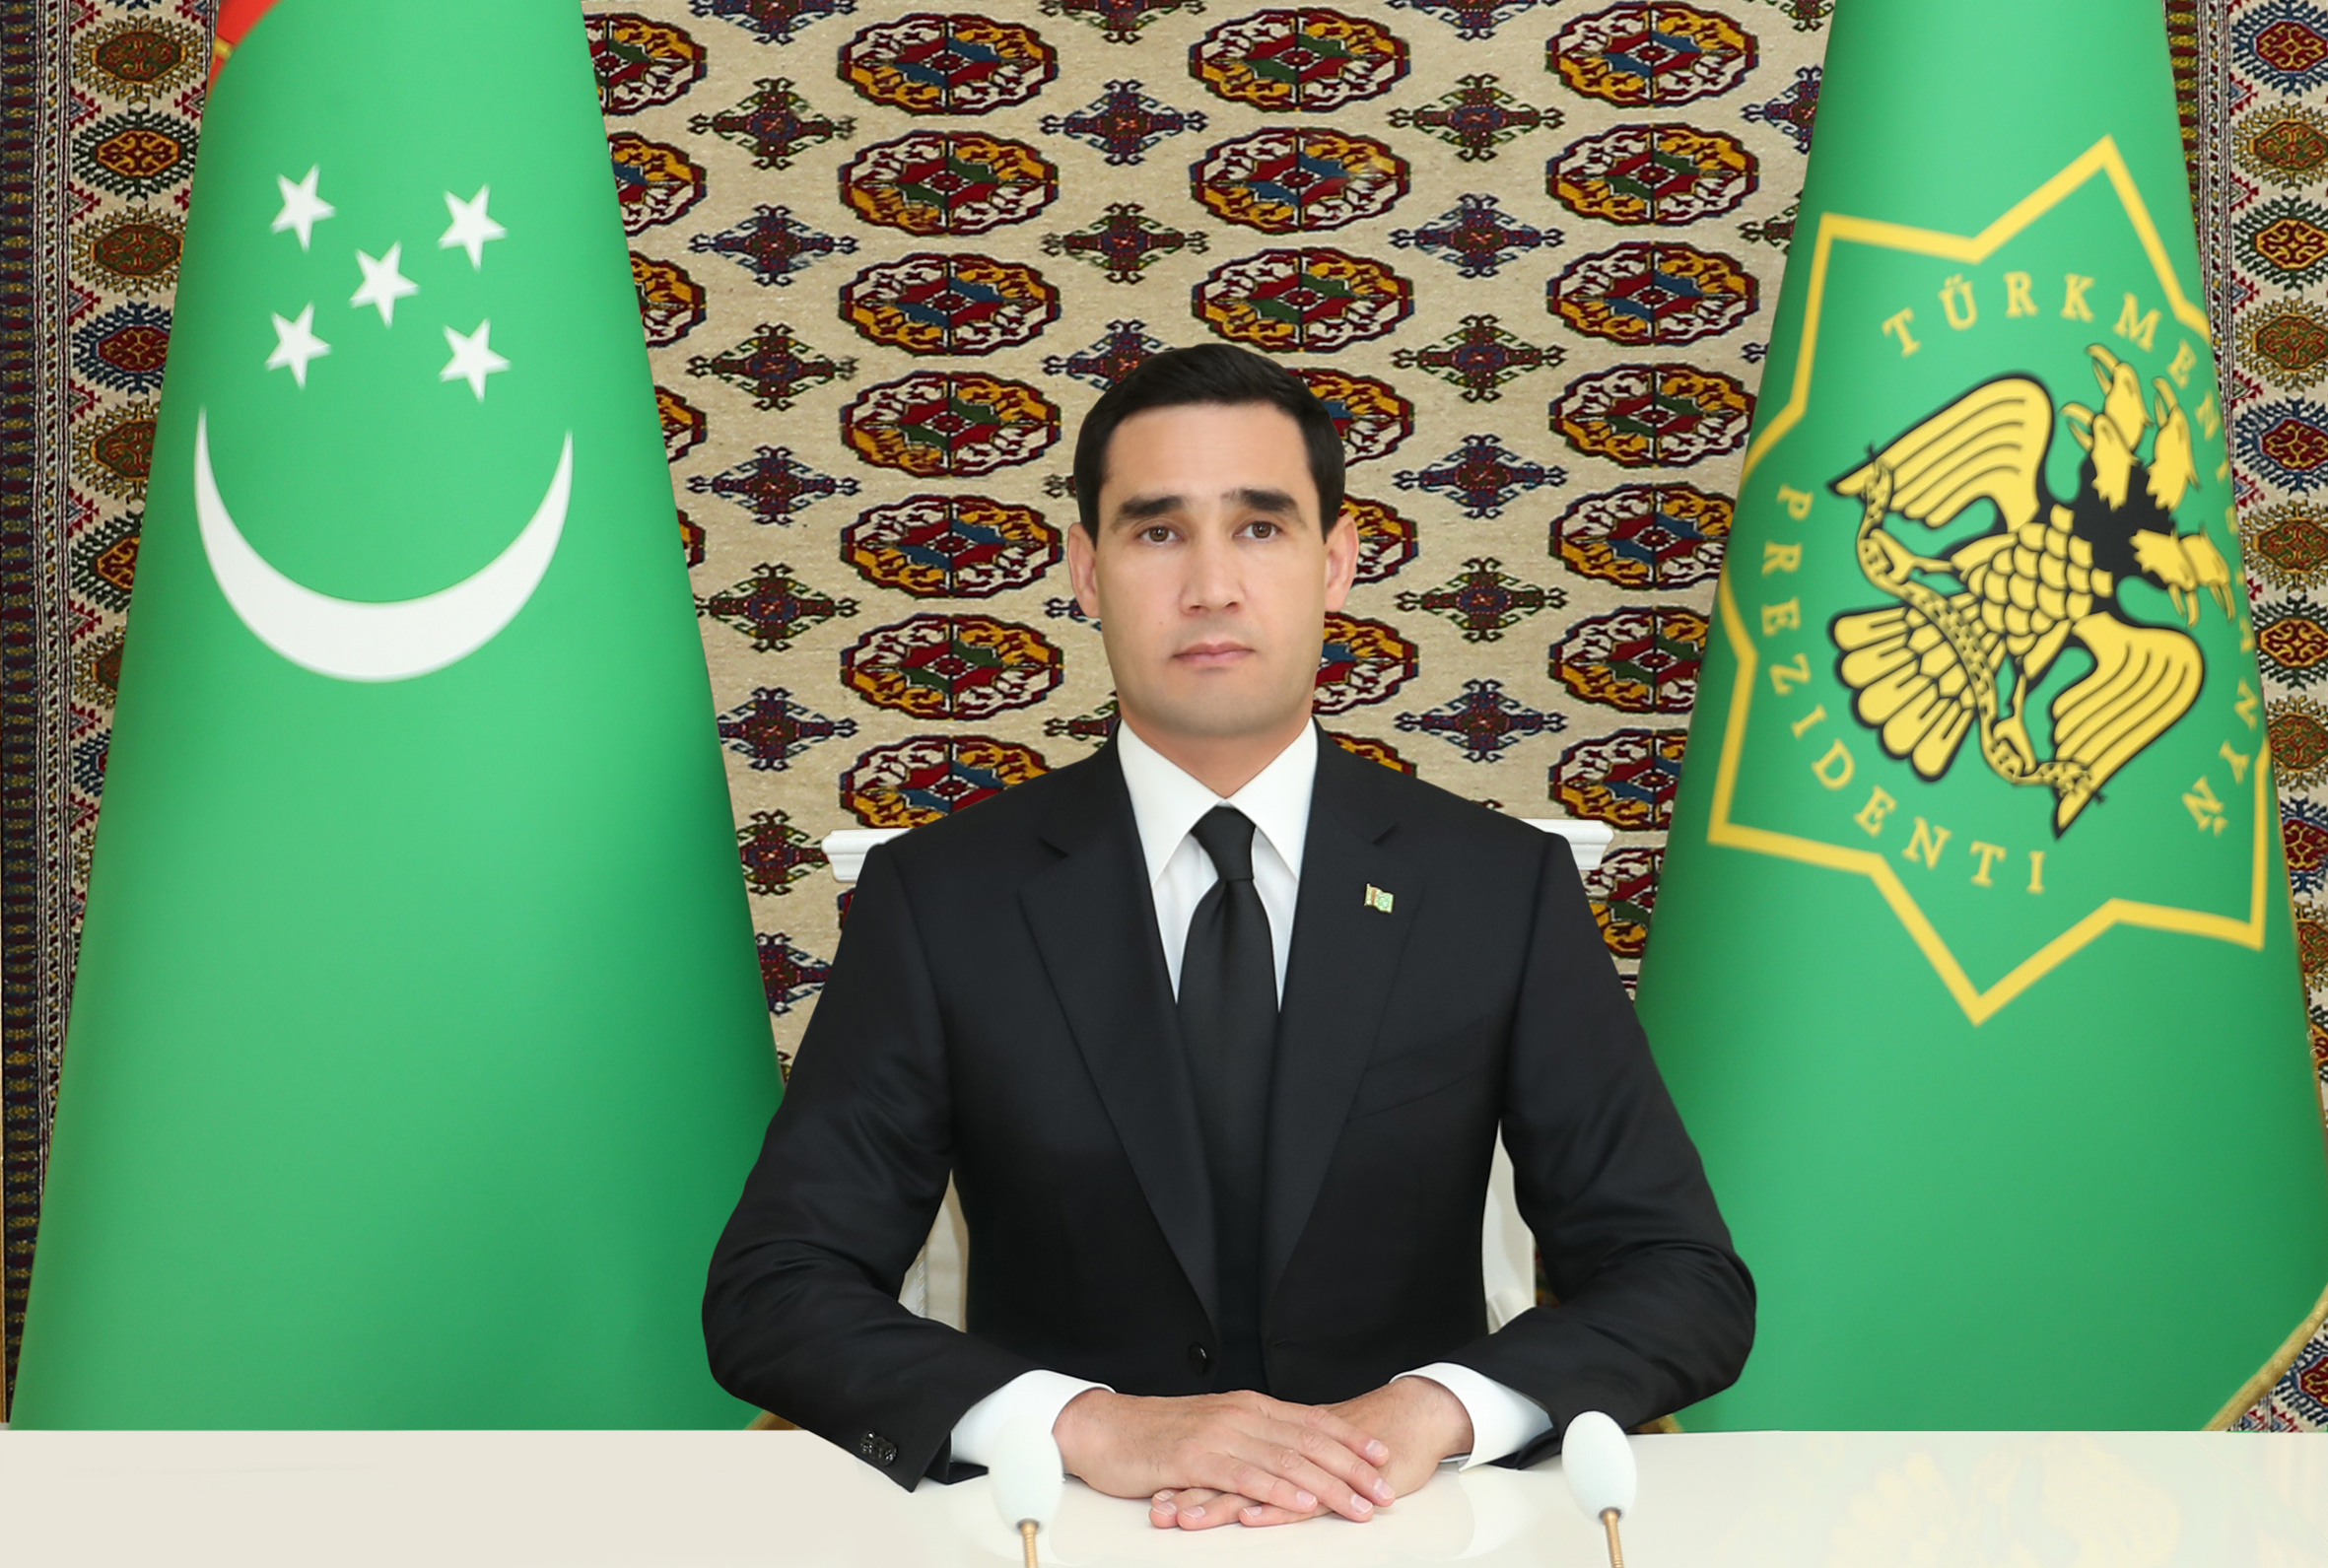 Speech by the President of Turkmenistan Serdar Berdimuhamedov at the Conference of Ministers of Transport of Landlocked Developing Countries